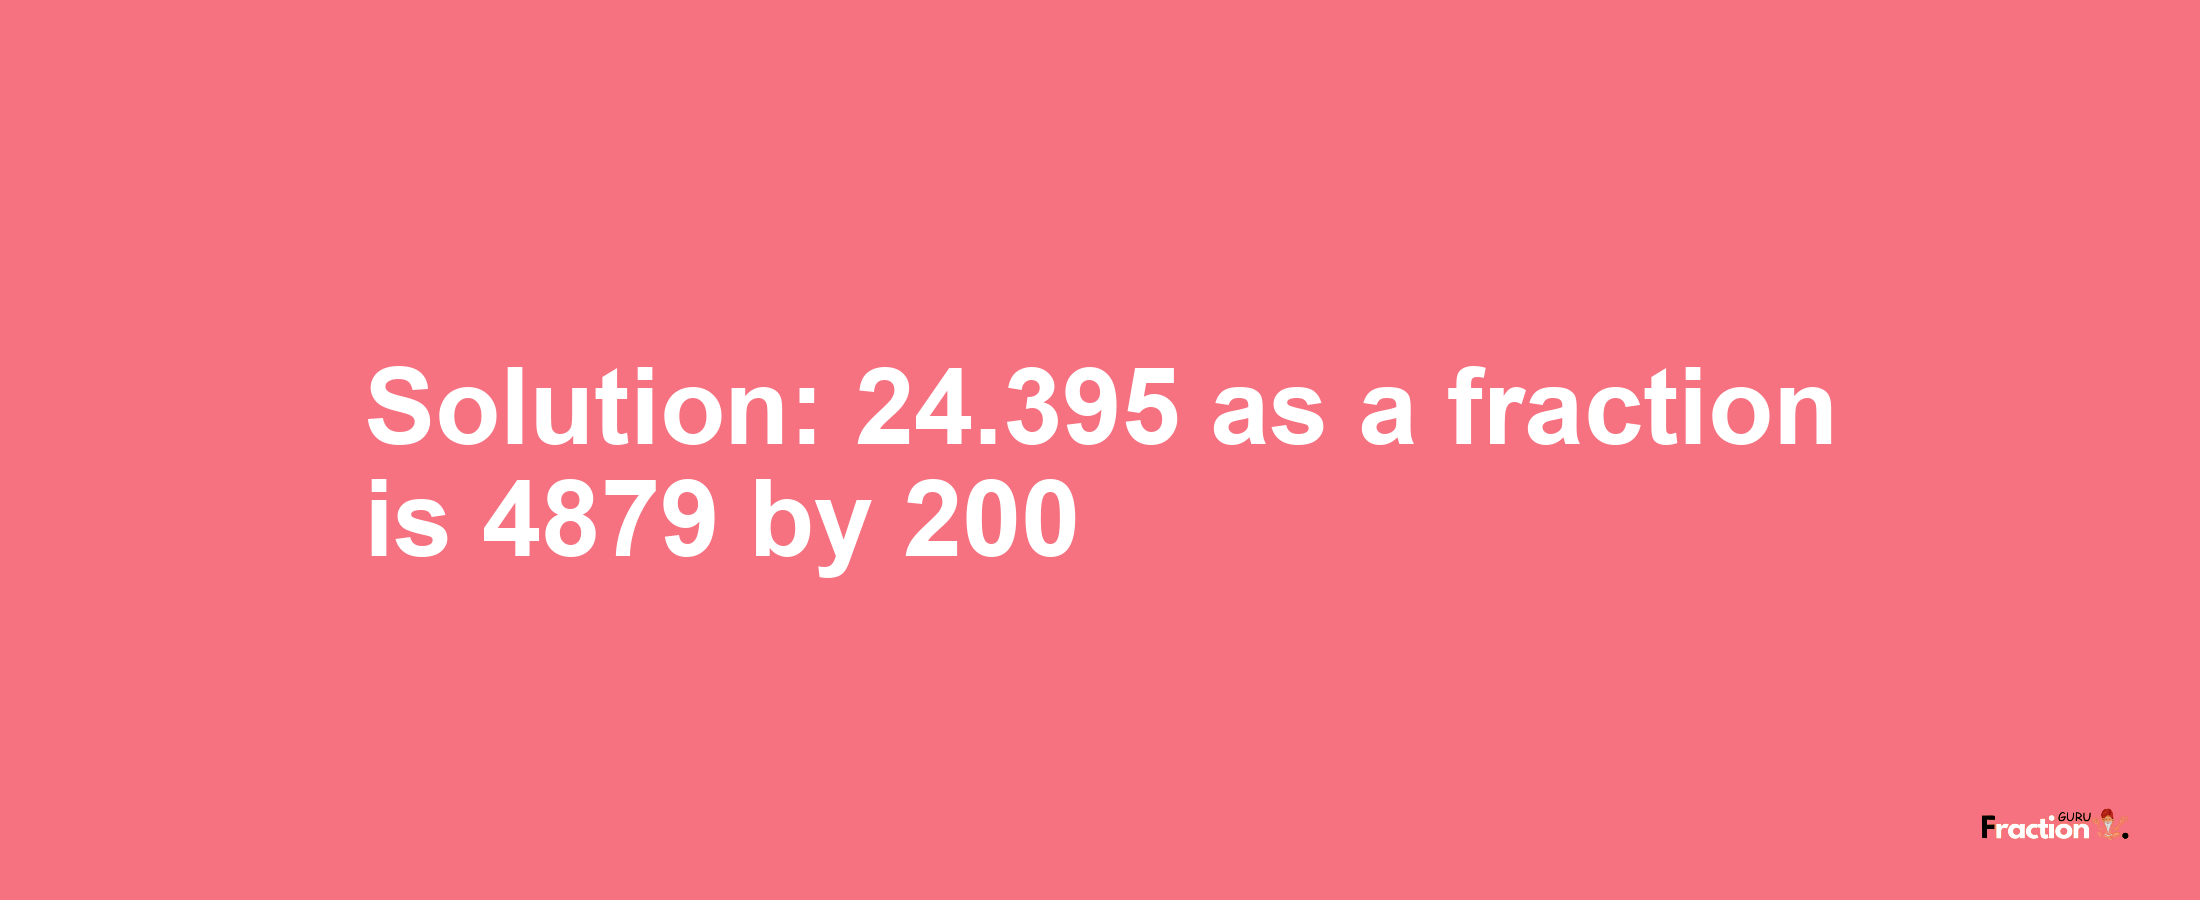 Solution:24.395 as a fraction is 4879/200